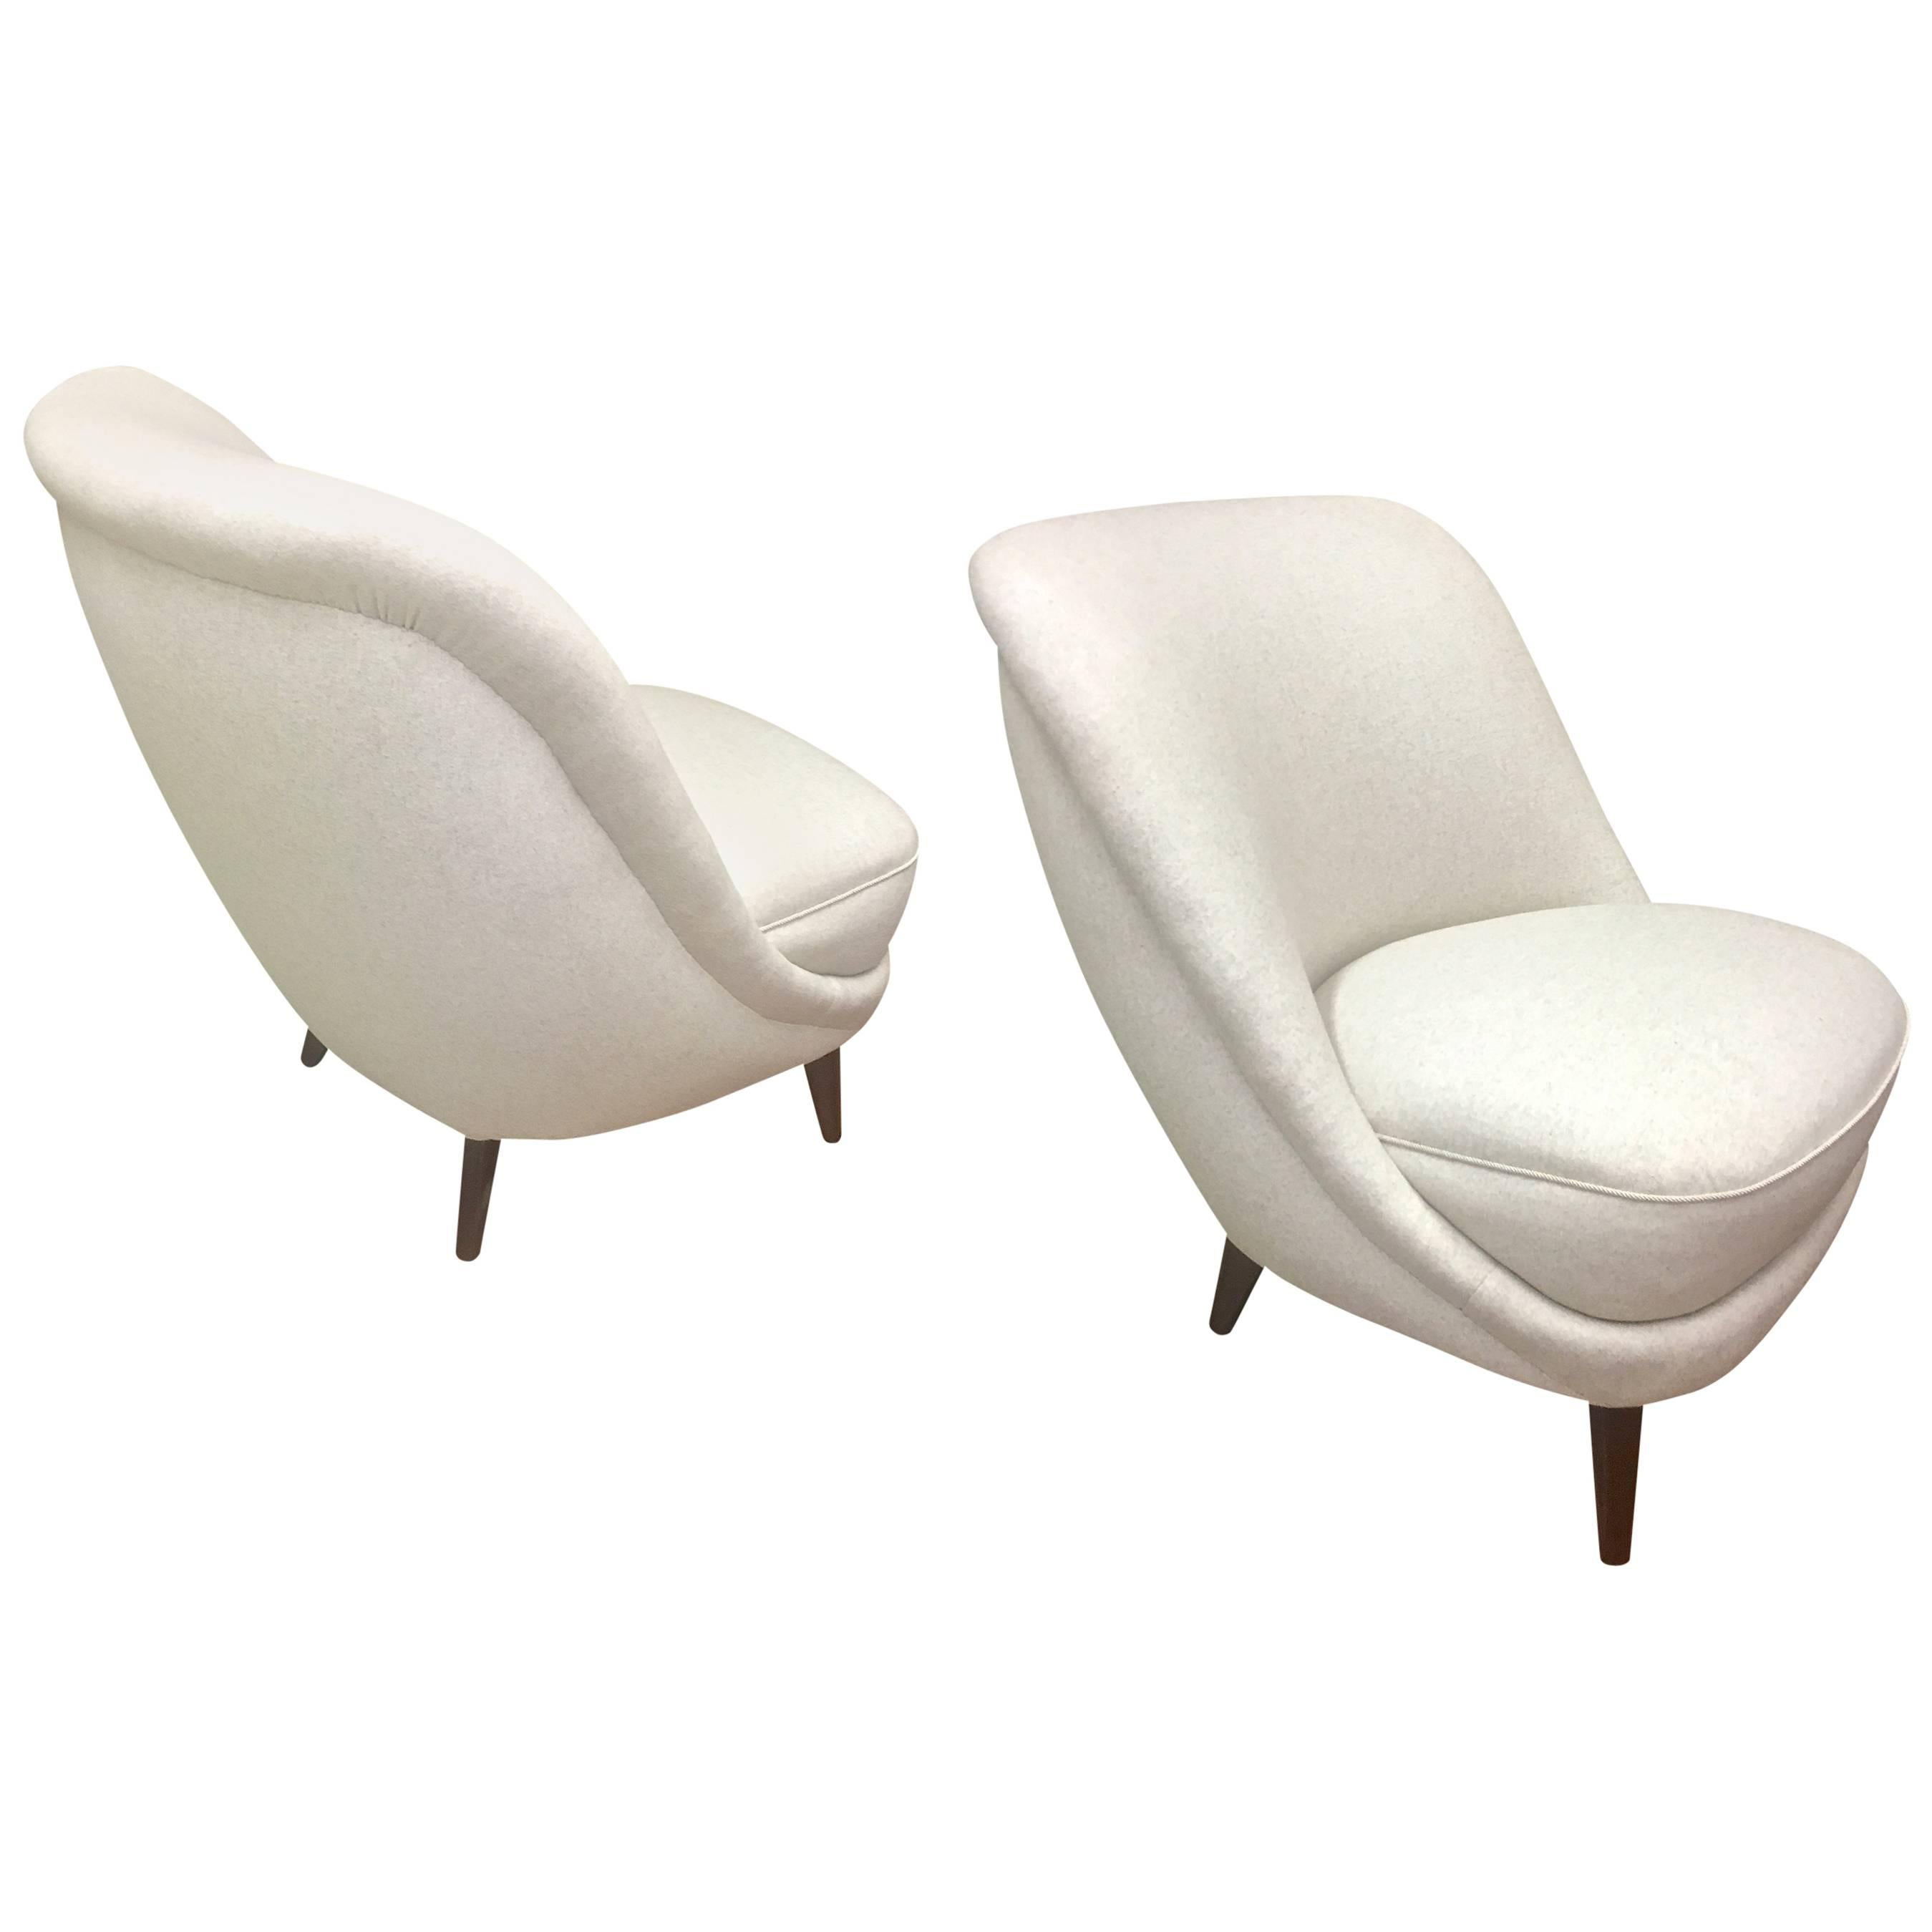 In the Style of Gio Ponti Pair of Elegant Slipper Chair Covered in Neutral Wool